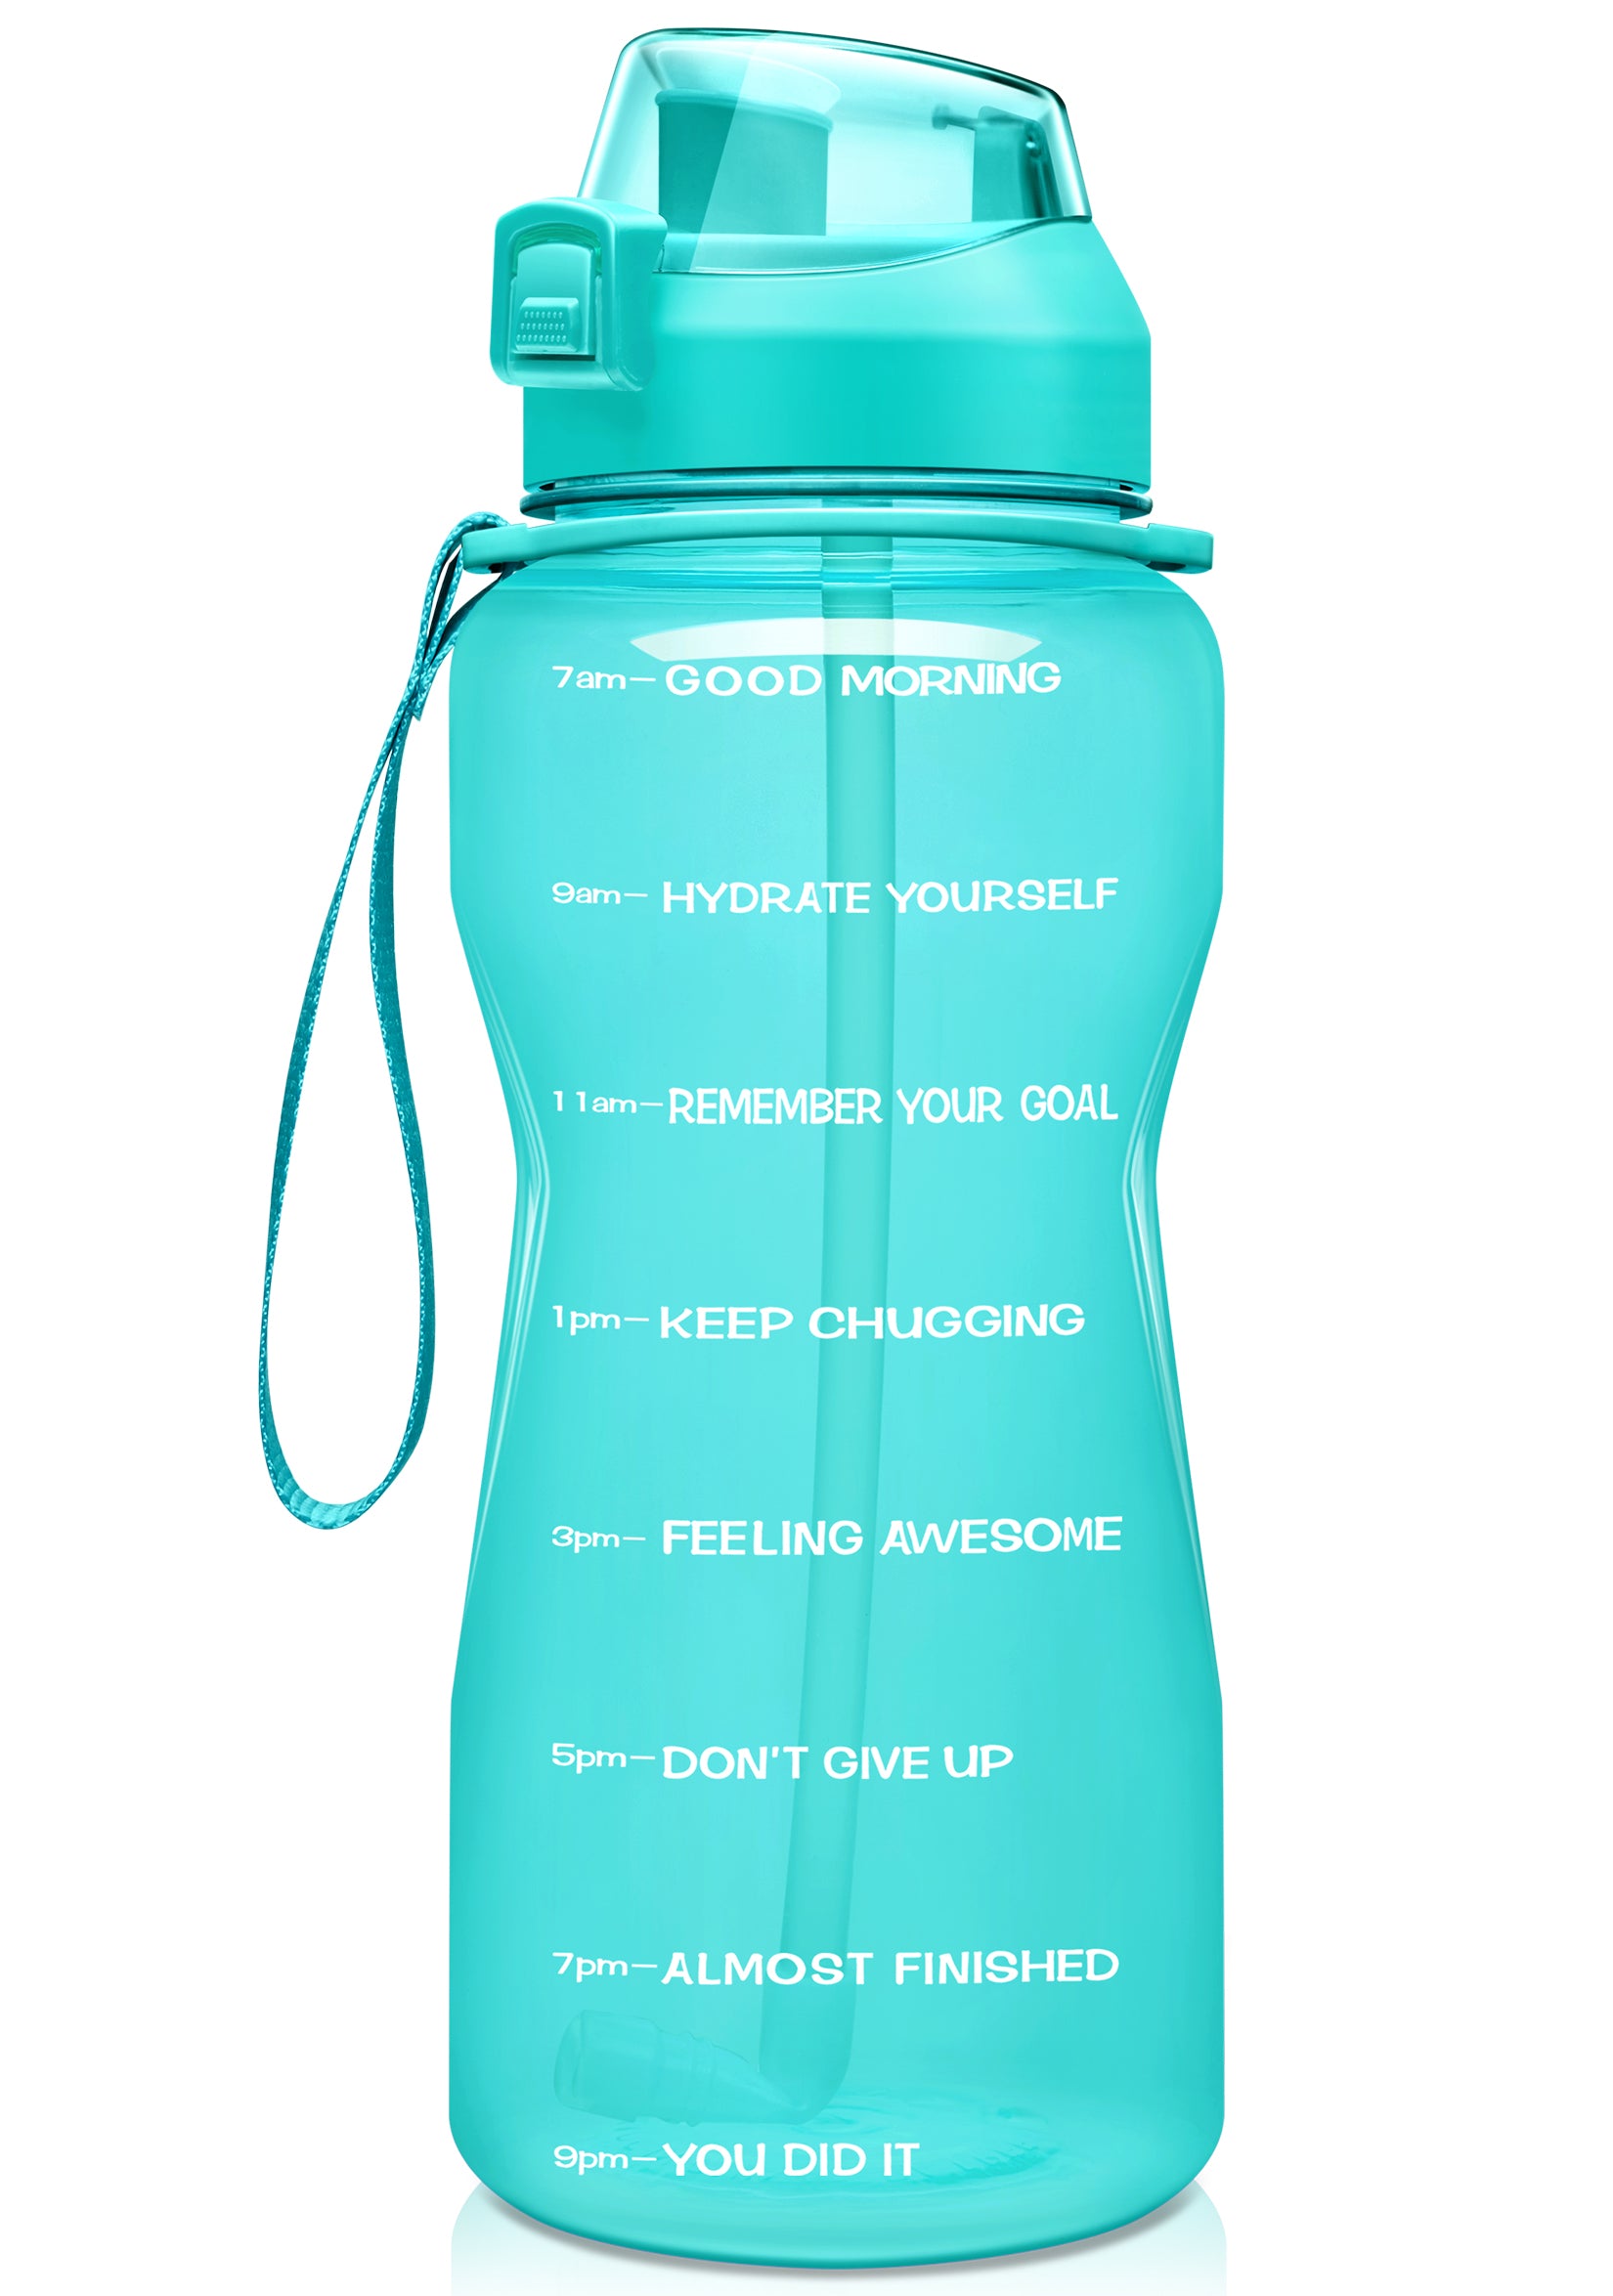 Fidus Large Half Gallon/64oz Motivational Water Bottle with Time